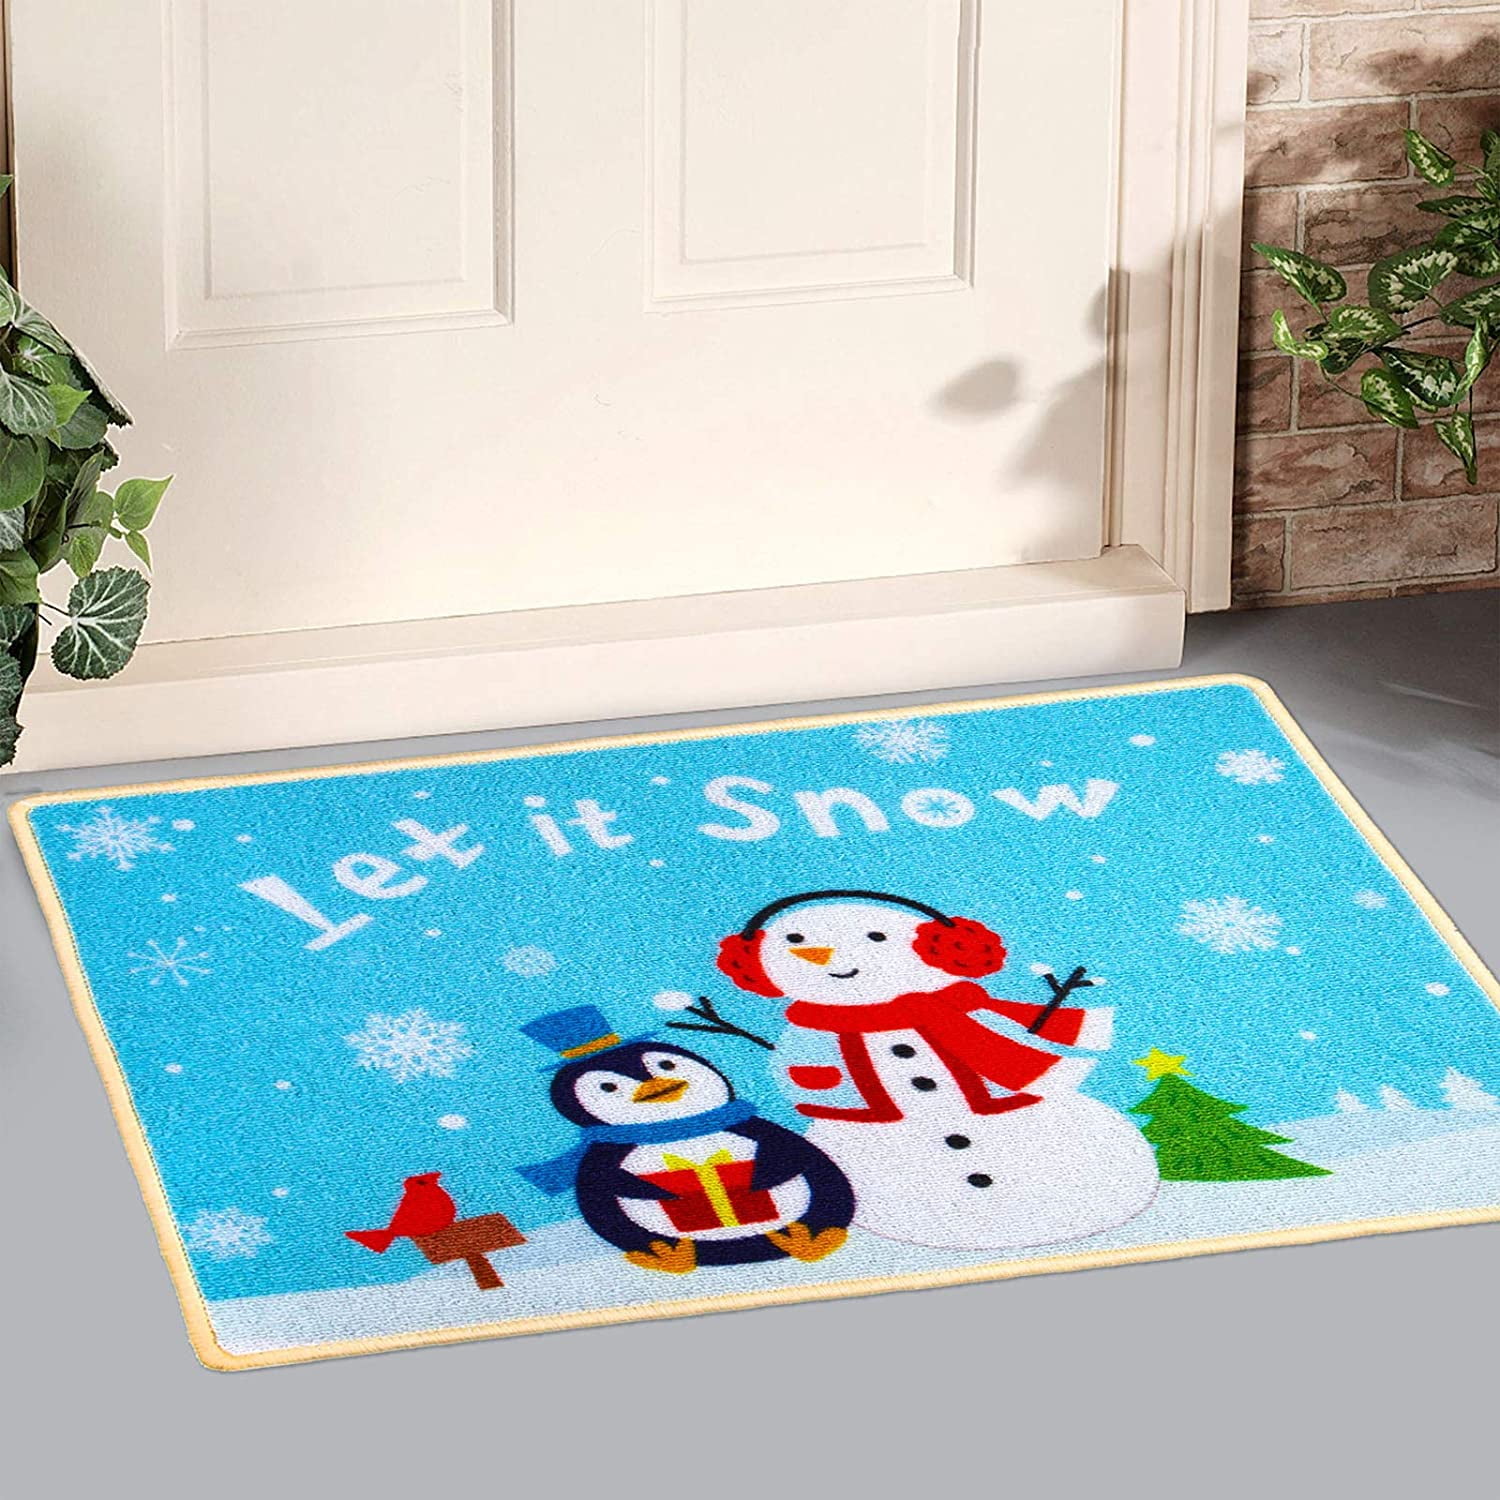 20 x 28 Inches Winter Home Decoration URATOT Winter Decorative Doormats Creative Snowman Holiday Welcome Floor Mats Let It Snow Anti-Slip Rugs for Christmas 